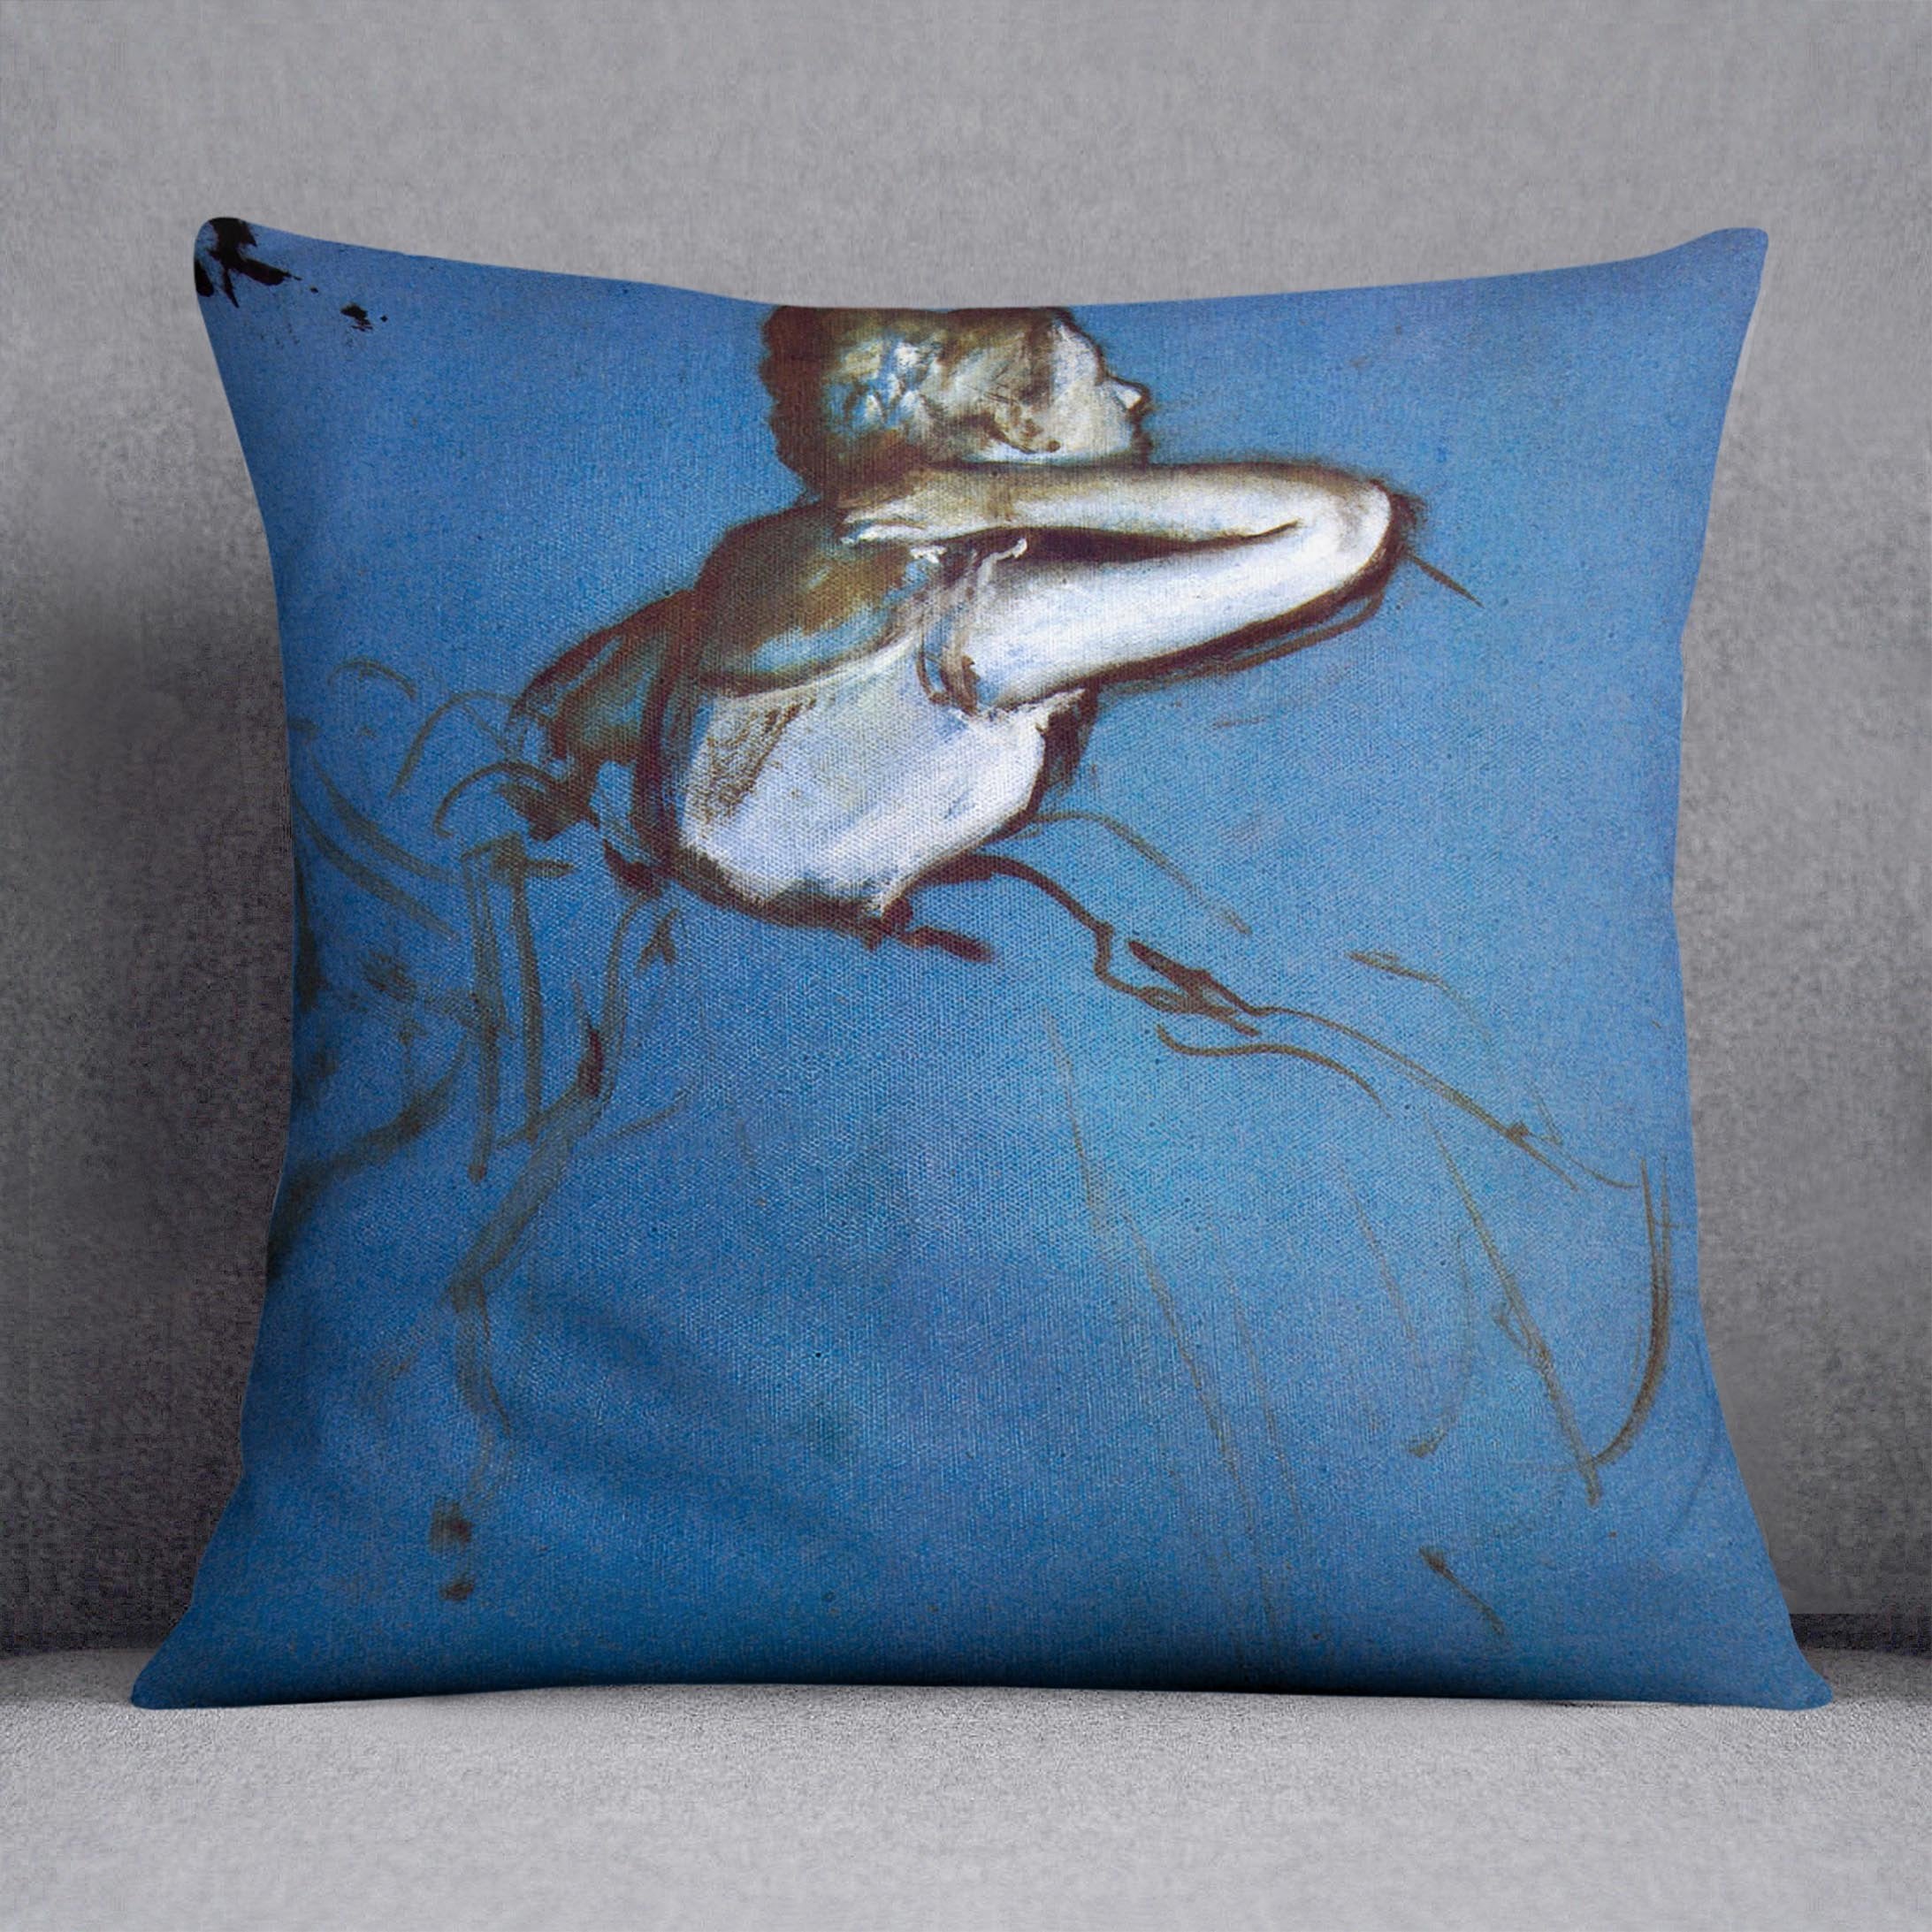 Sitting dancer in profile with hand on her neck by Degas Cushion